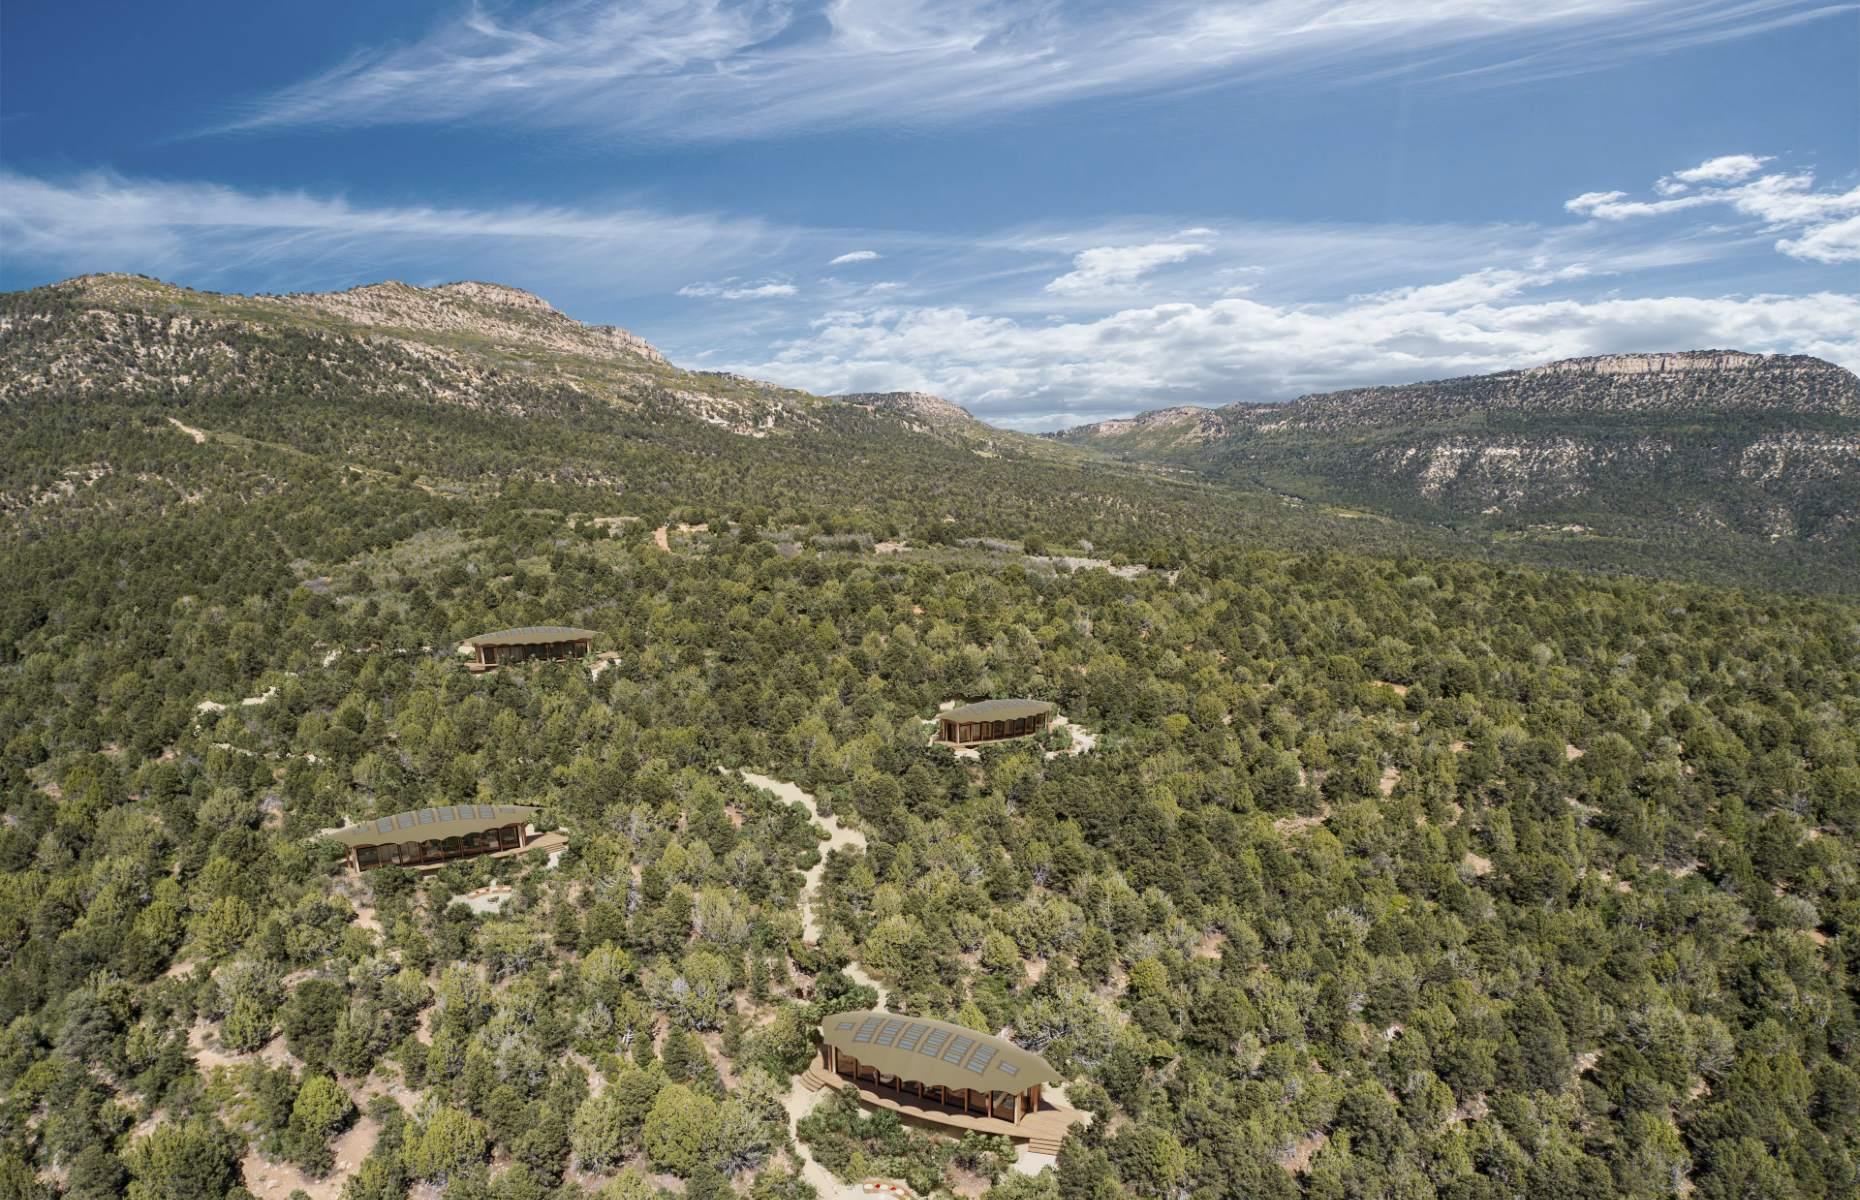 <p>One of the hottest debuts in the world of sustainable travel in 2022, Spirit will be a stunning luxury eco resort in Utah’s Zion National Park. Created by Nomadic Resorts, it will comprise 36 individual suites and four homesteads, whose unique leaf-shaped rooftops will be covered in 3.2kWh of solar panels and photovoltaic fabric to generate energy. Other planet-friendly features include an aquaponic greenhouse, where guests can check out a range of plant life, plus electric bikes for traveling around on. </p>  <p><strong><a href="https://www.loveexploring.com/galleries/115440/the-worlds-best-eco-hotels?page=1">Next, check out the most eco-friendly hotels in the world</a></strong></p>